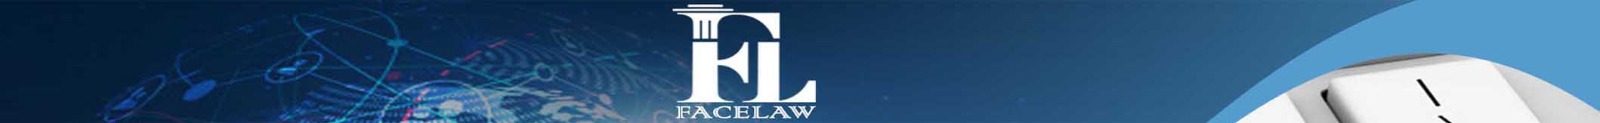 best iranian commercial litigation lawyer in USA